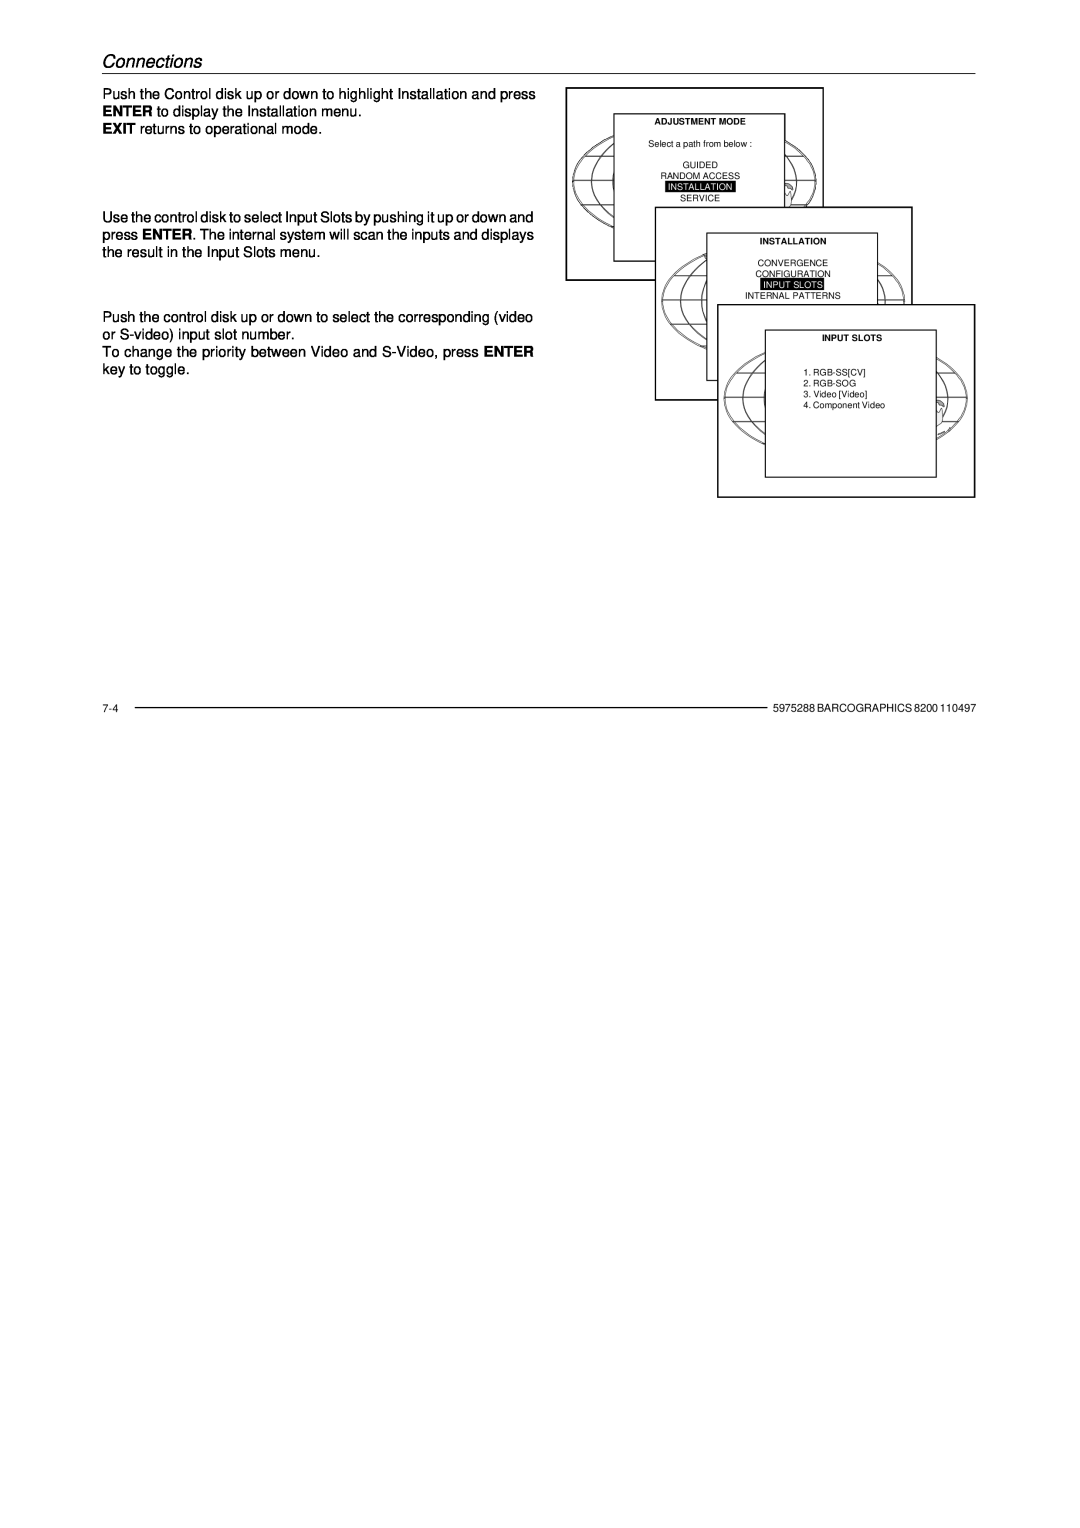 Barco R9001330 owner manual Connections, EXIT returns to operational mode 